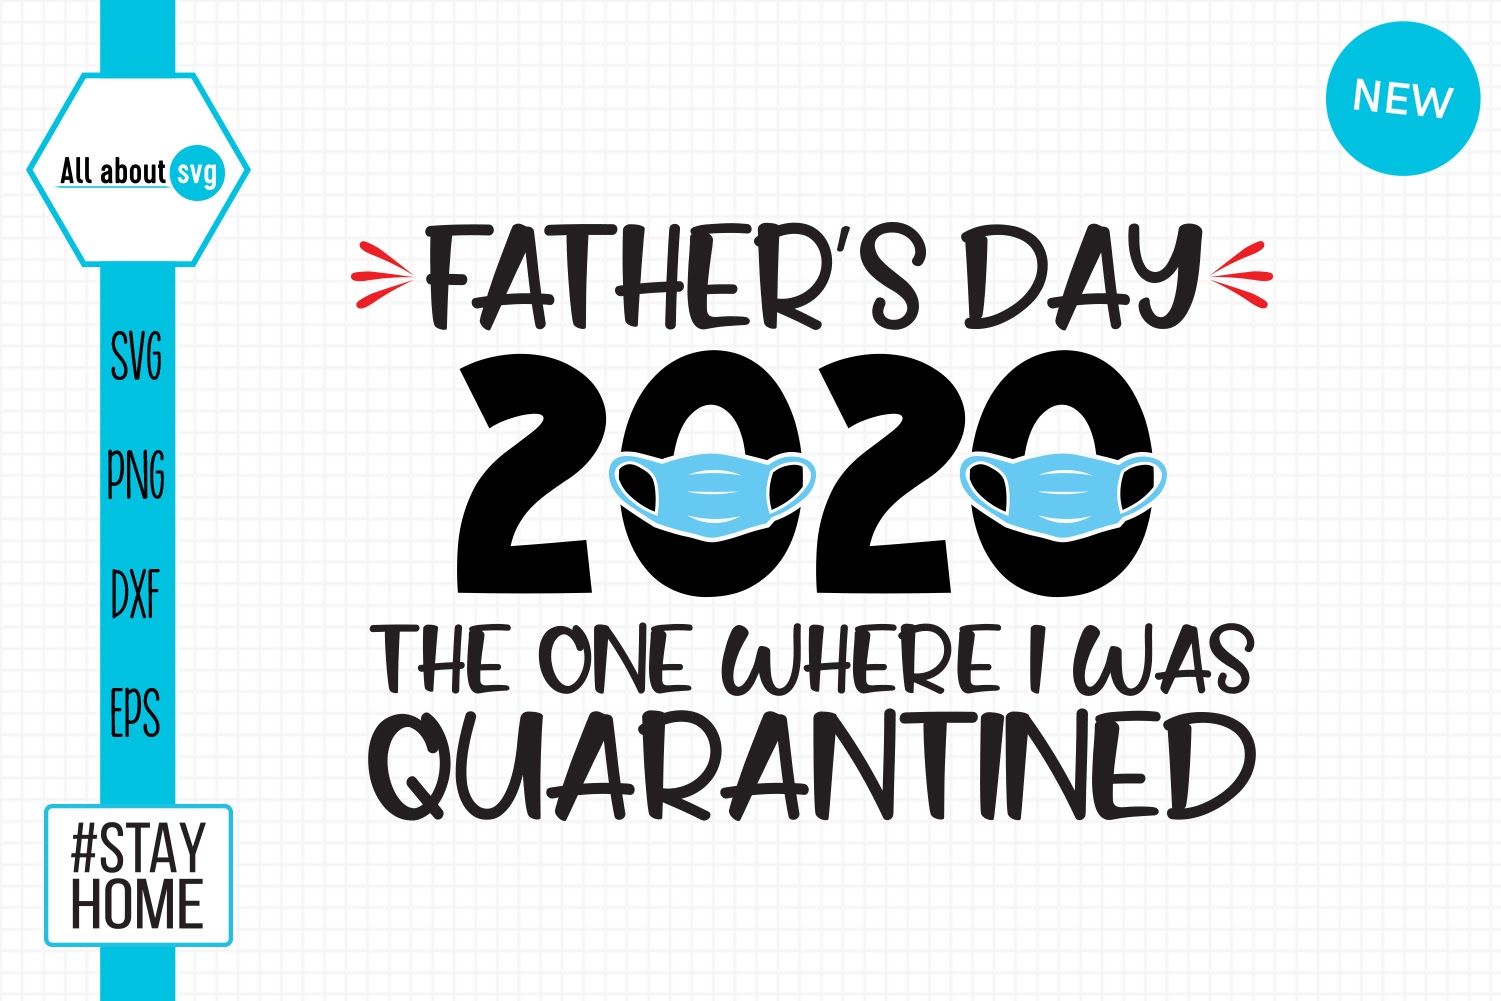 Download Fathers Day Fishing Svg Design Corral